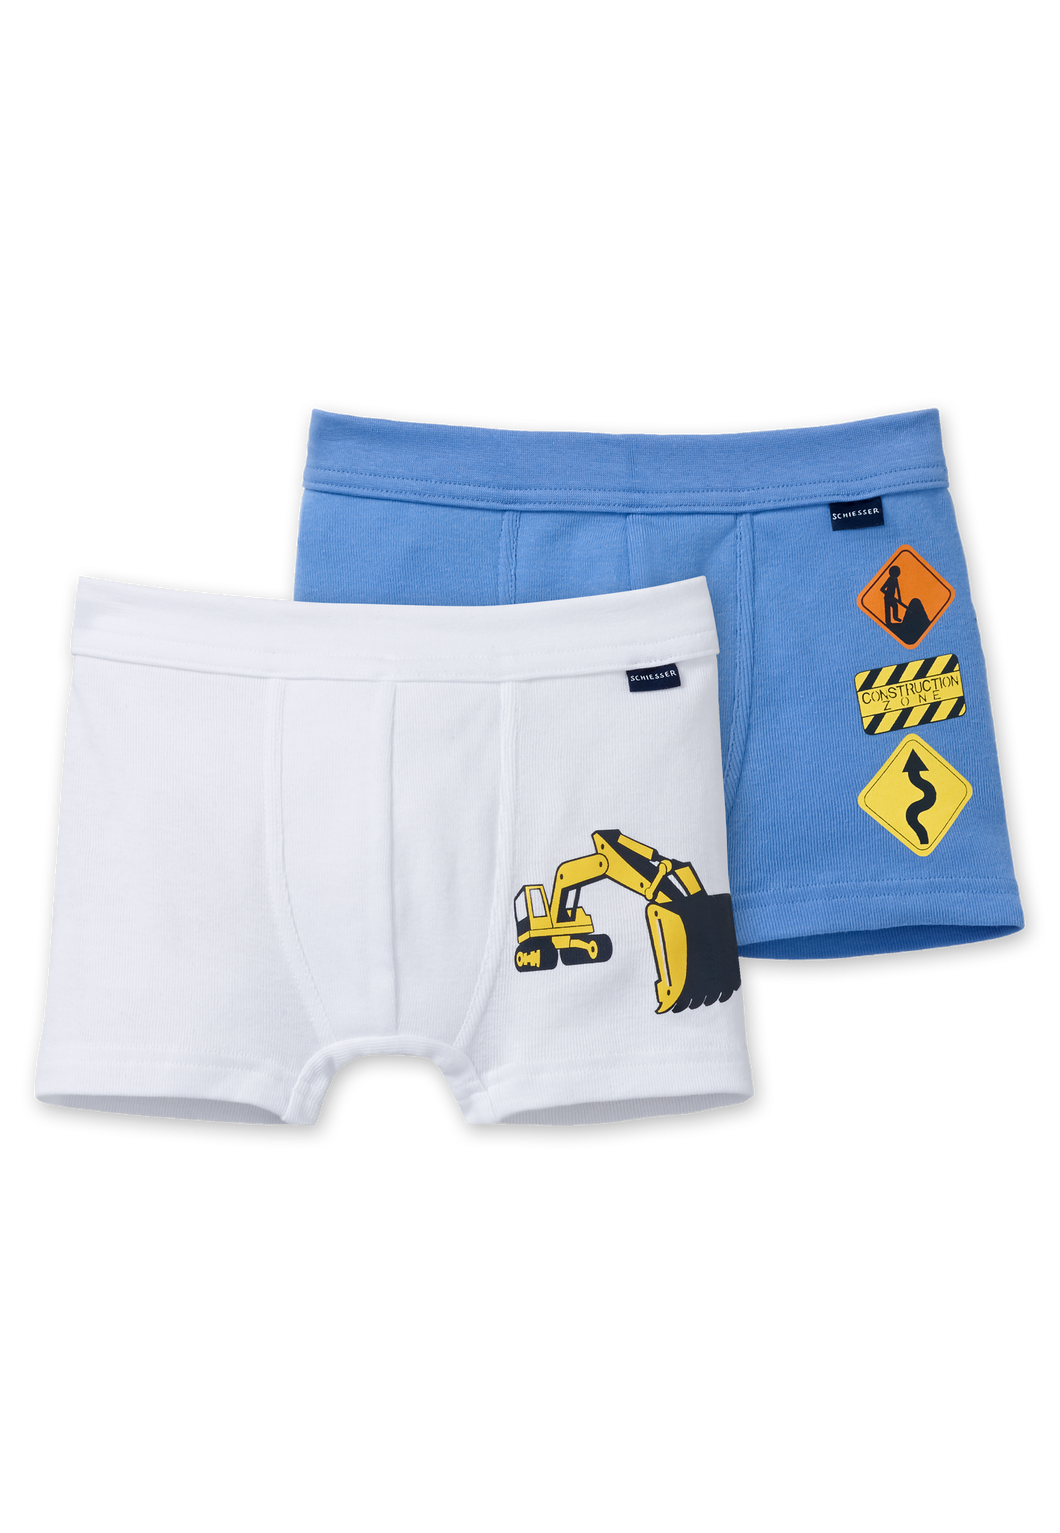 Boxer 2pack 